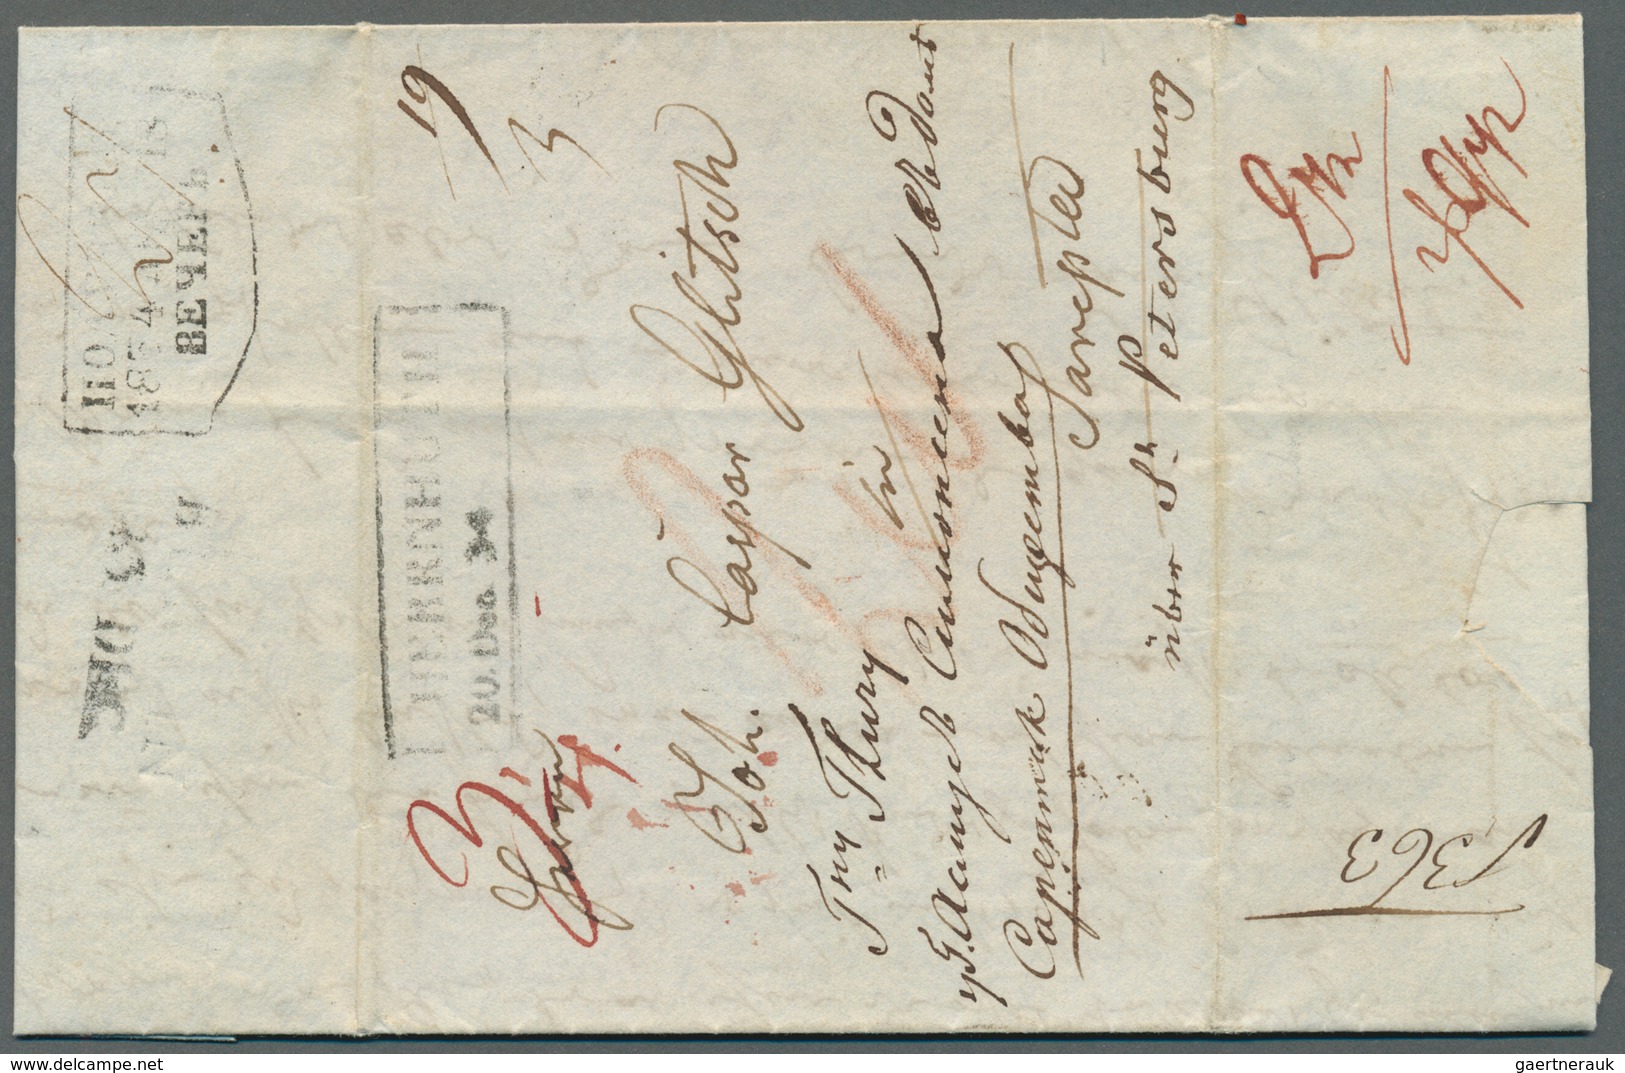 00504 Canada - Vorphilatelie: 1834 (21 Aug) Missionary Letter From Hoffenthal (today Hopedale), Labrador, - ...-1851 Vorphilatelie